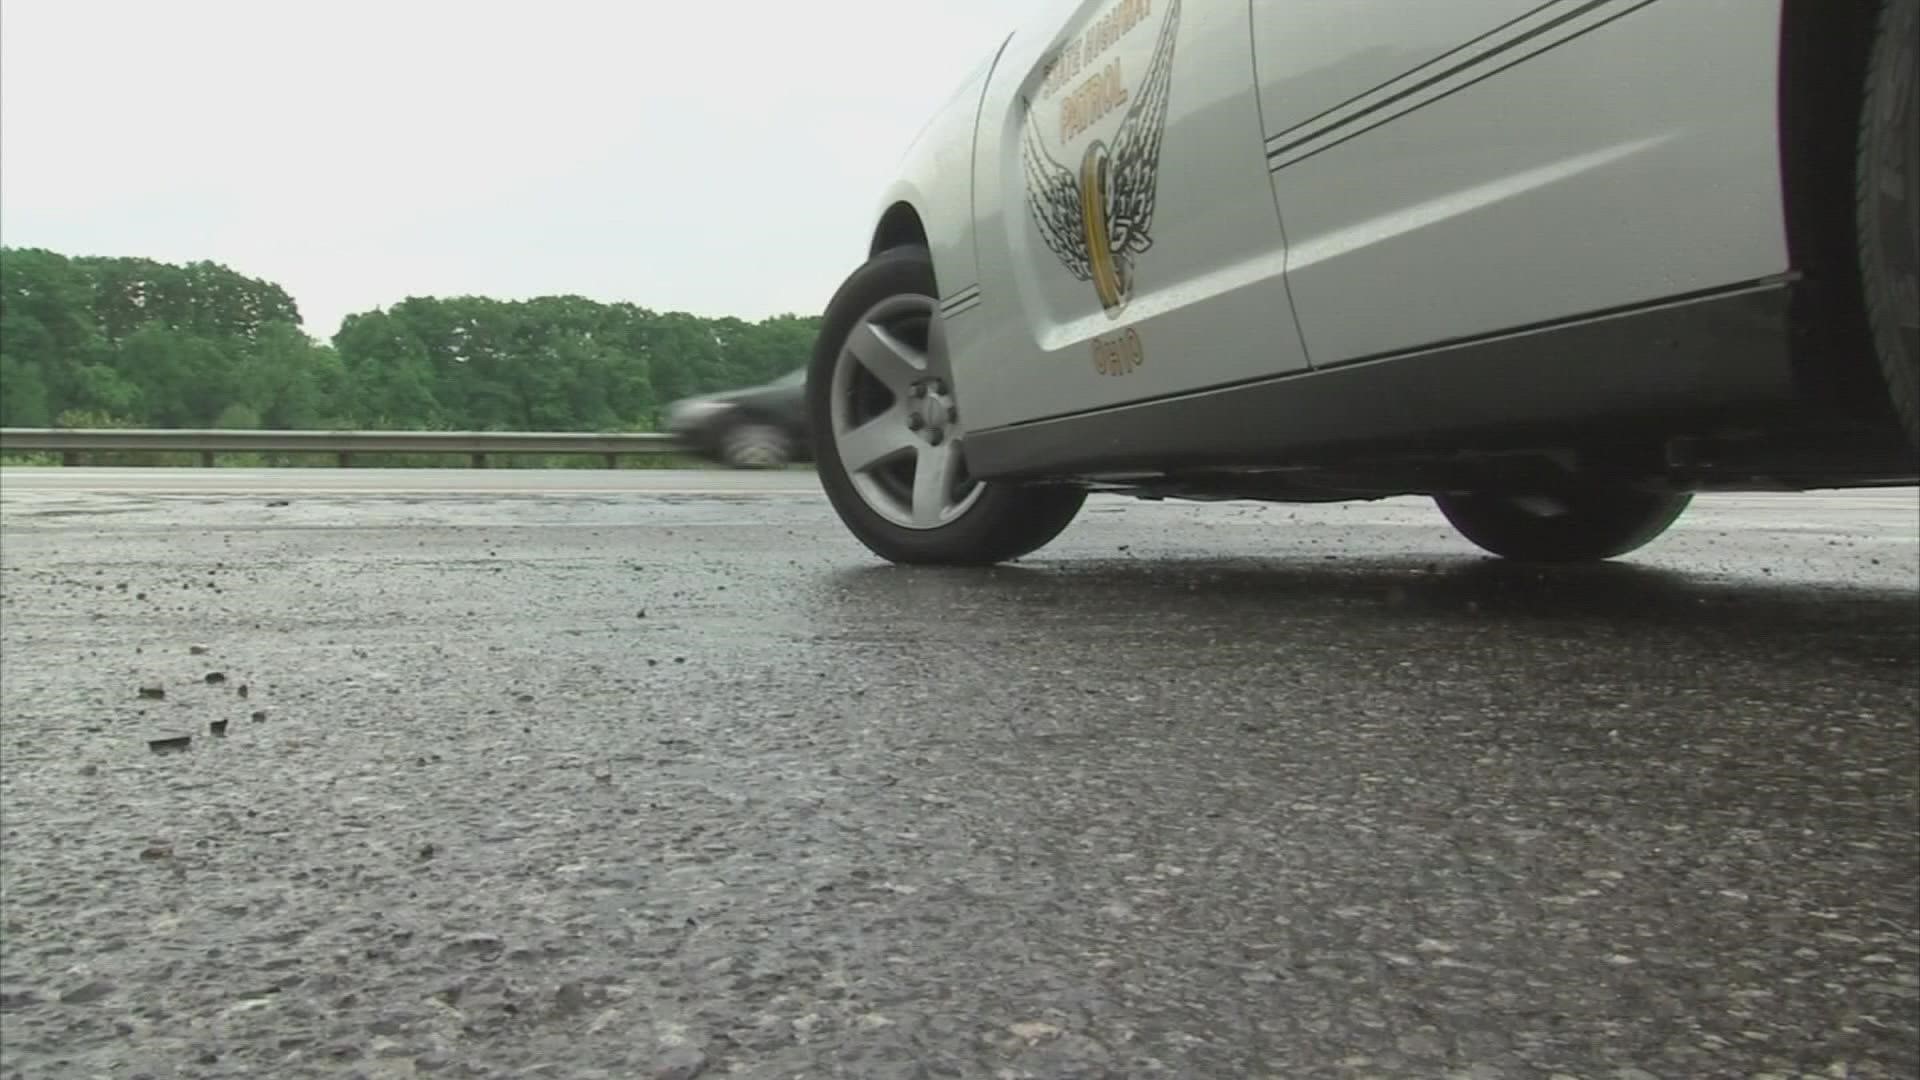 According to OSHP, 546 of roughly 1,000 citations were given to drivers in the Buckeye State.